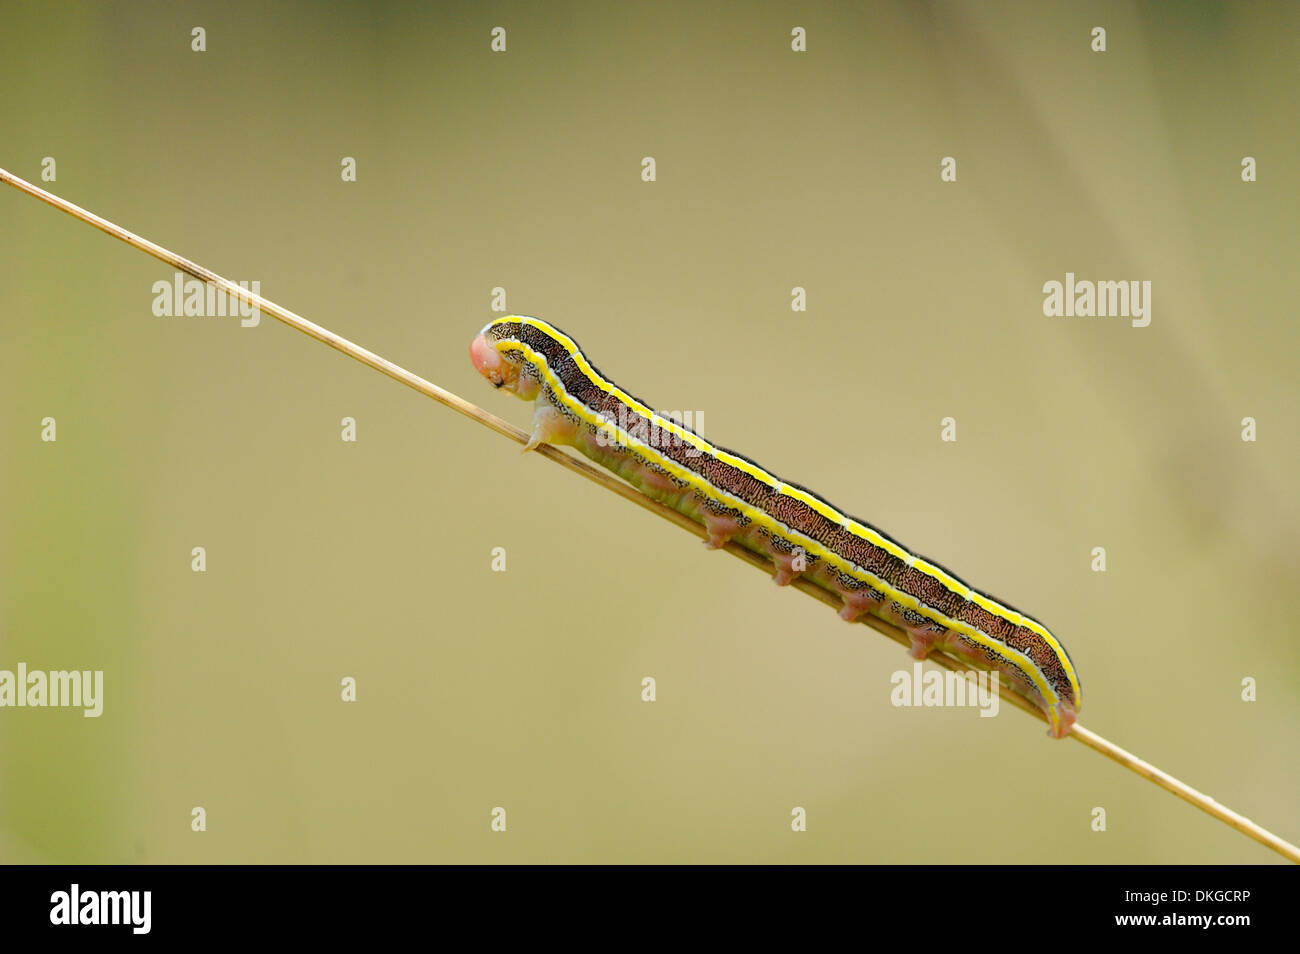 Close-up of a caterpillar from a Broom Moth (Ceramica pisi) at a grass stalk Stock Photo